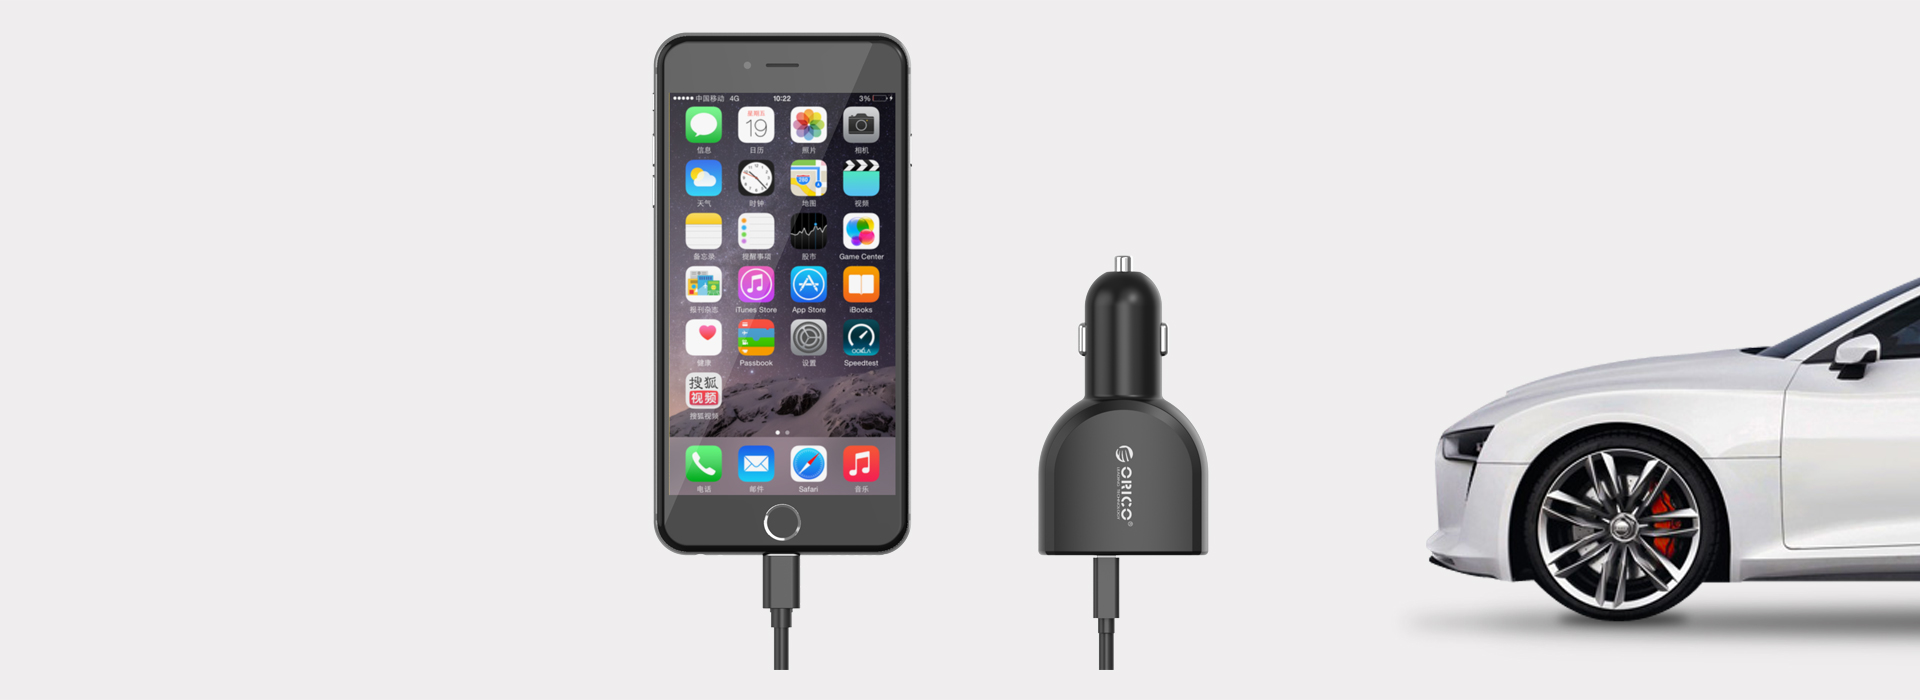 The USB car charge is with Wide compatibility meets your needs